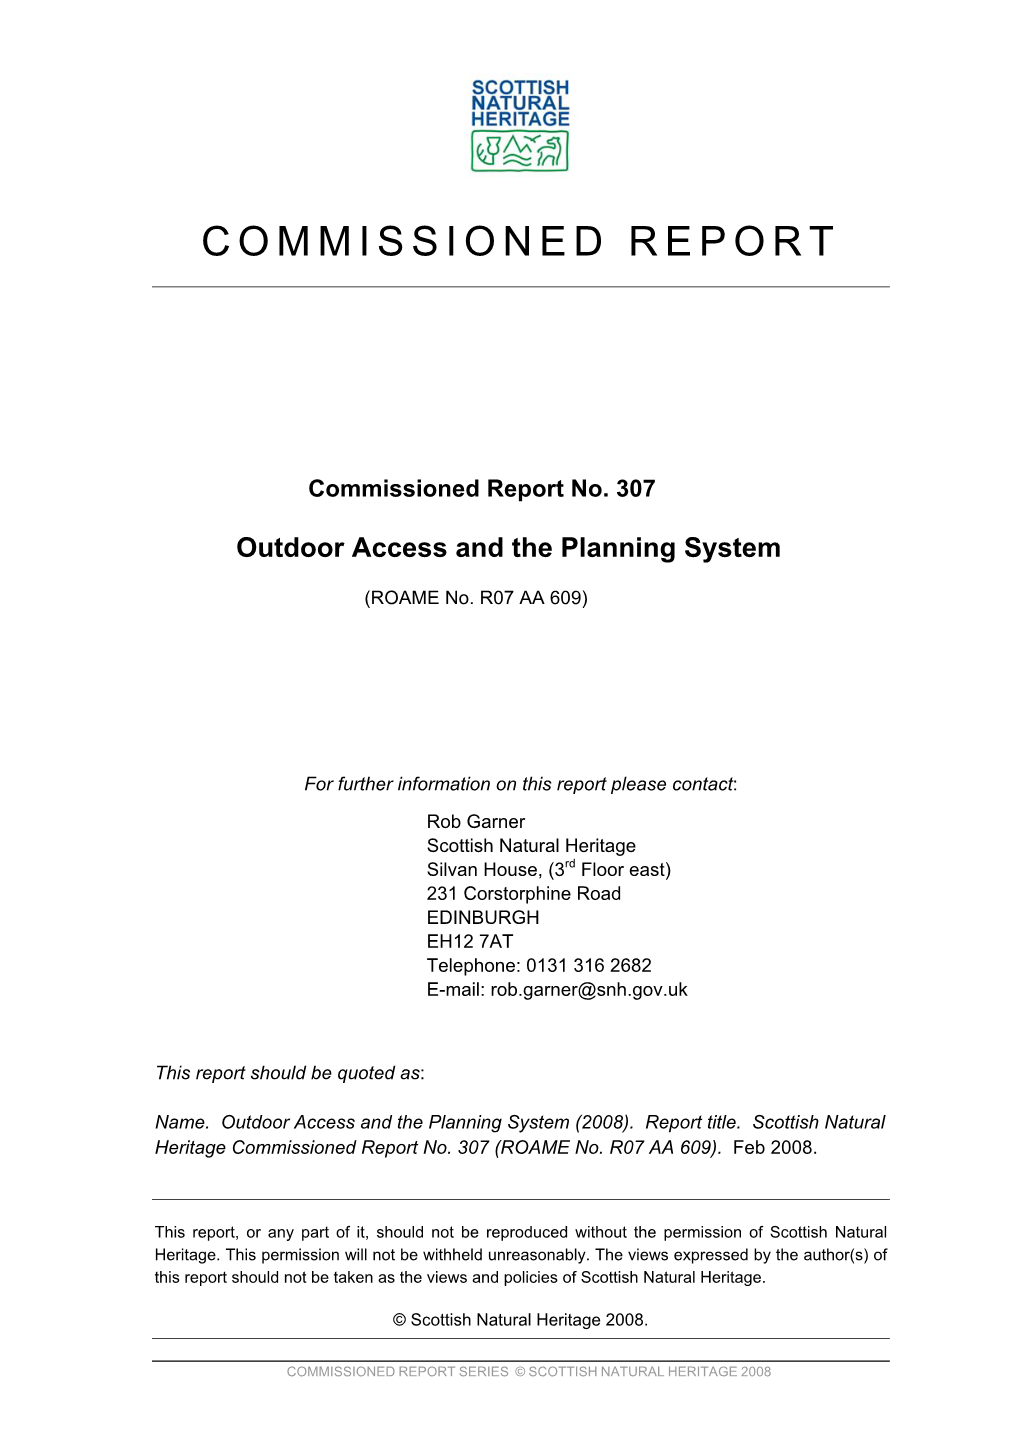 Outdoor Access and the Planning System